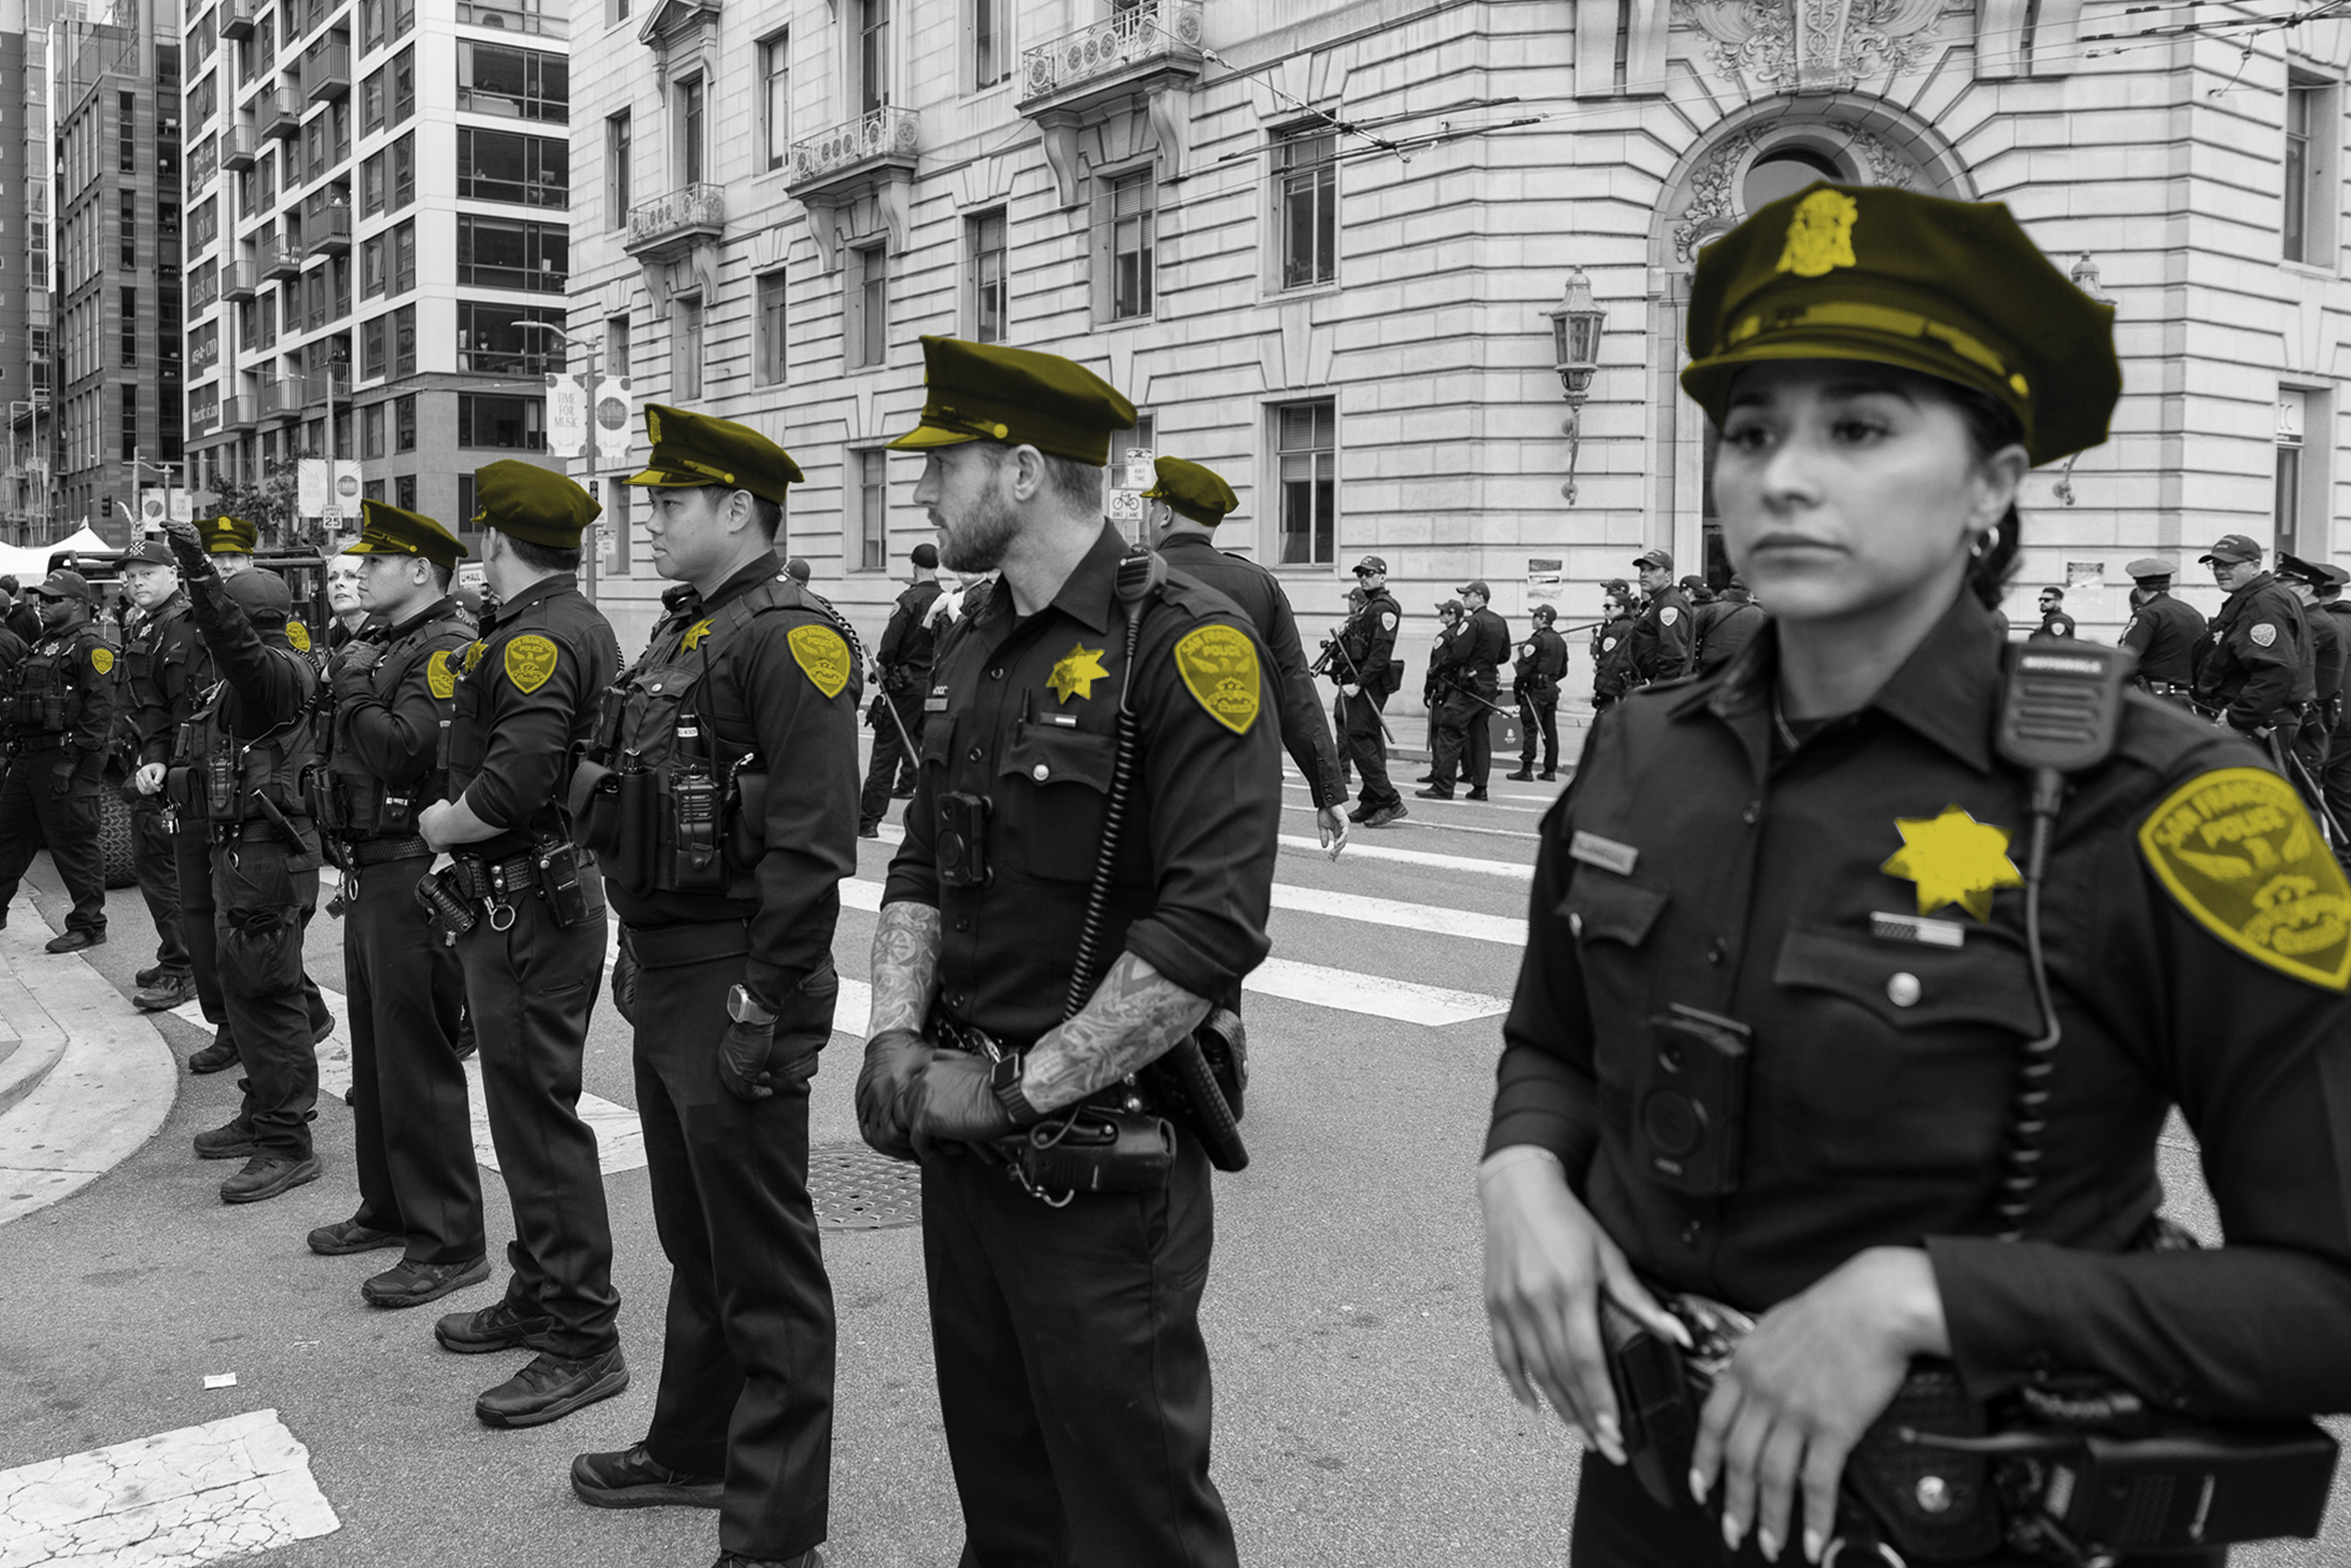 A group of police officers in uniforms stands lined up, badges prominent; image is monochrome with the badges highlighted in yellow.